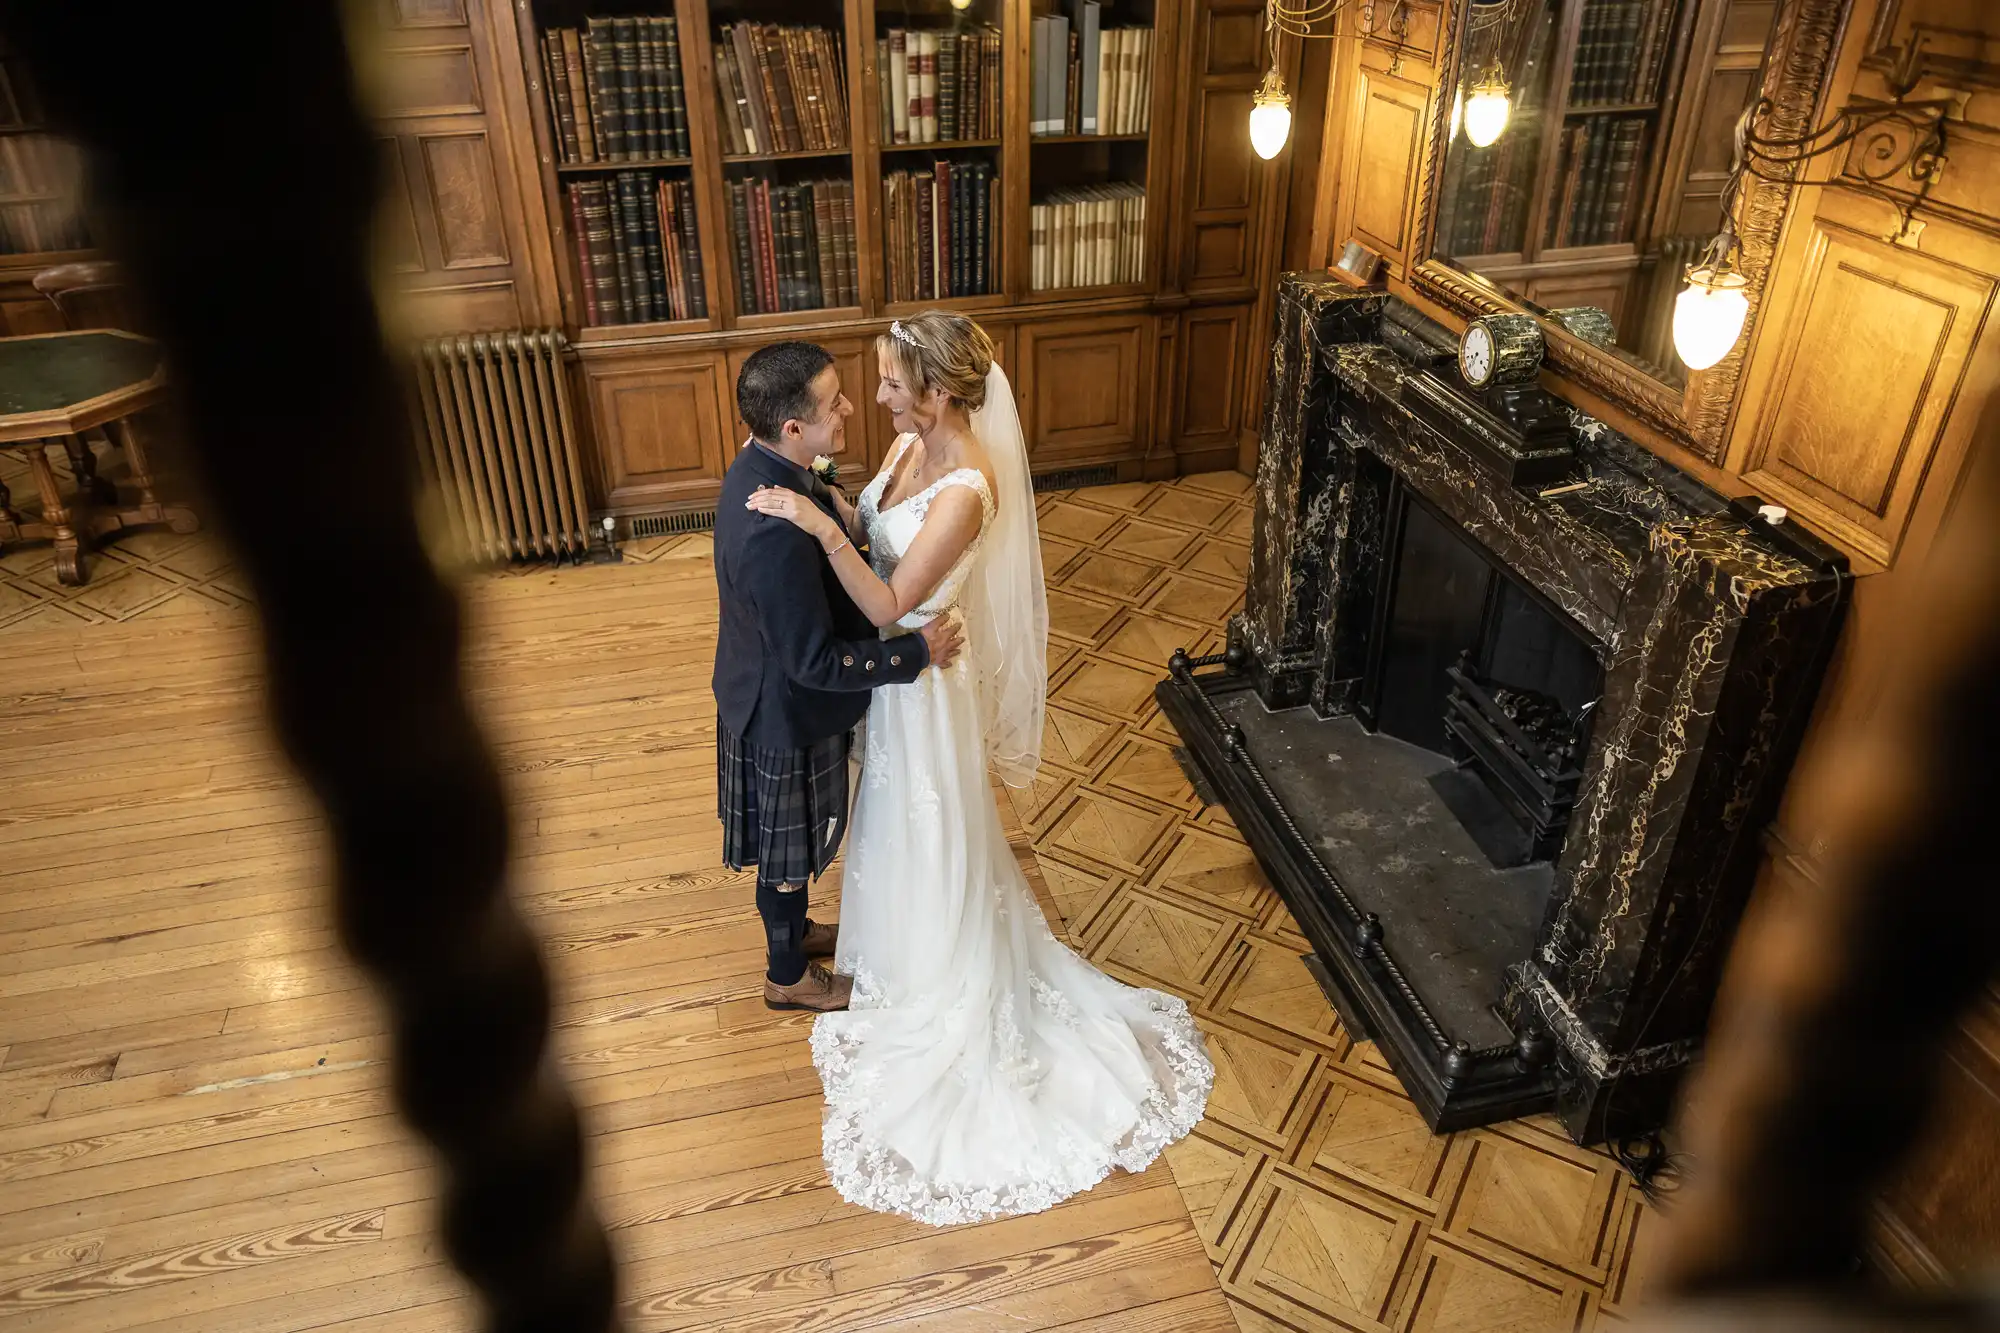 A bride and groom share a dance in a wood-paneled library, lit by ornate hanging lights. The groom wears a kilt, and the bride is in a white gown and veil.